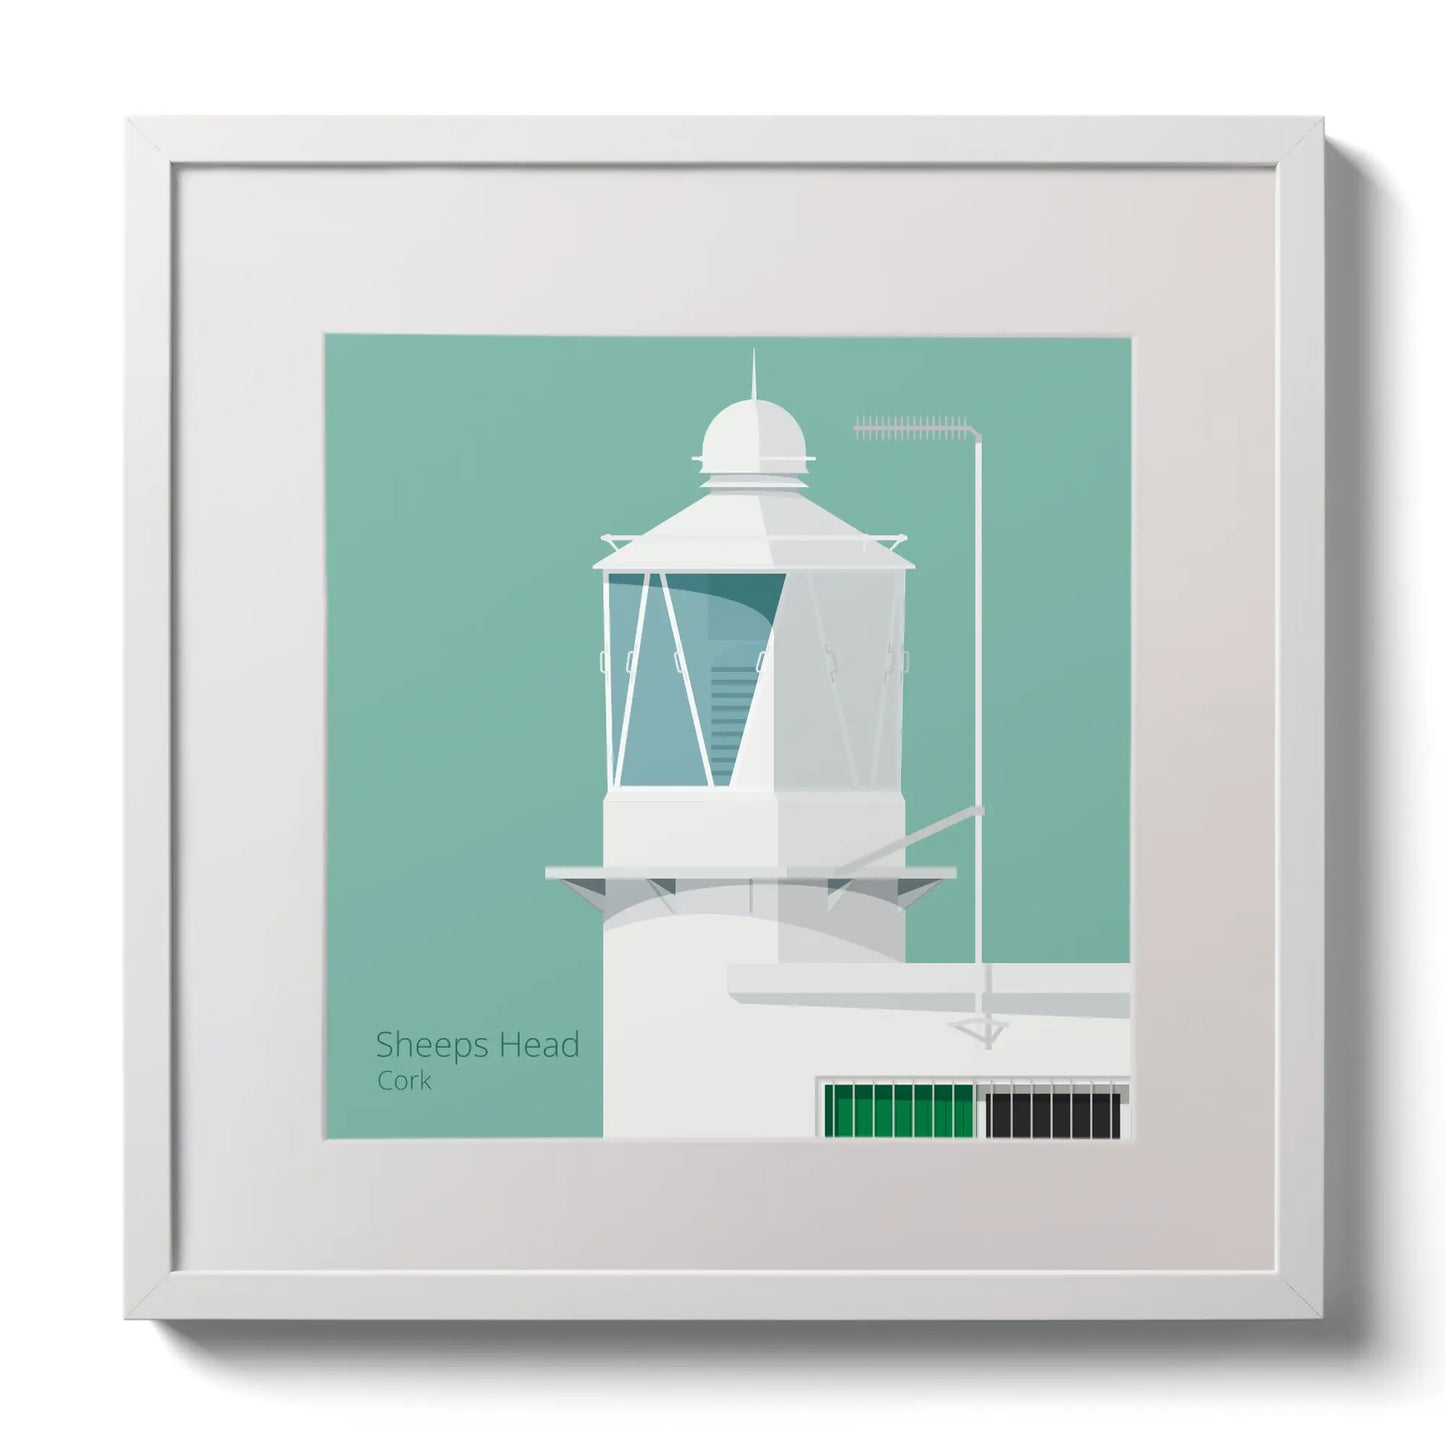 Illustration  Sheeps Head lighthouse on an ocean green background,  in a white square frame measuring 30x30cm.